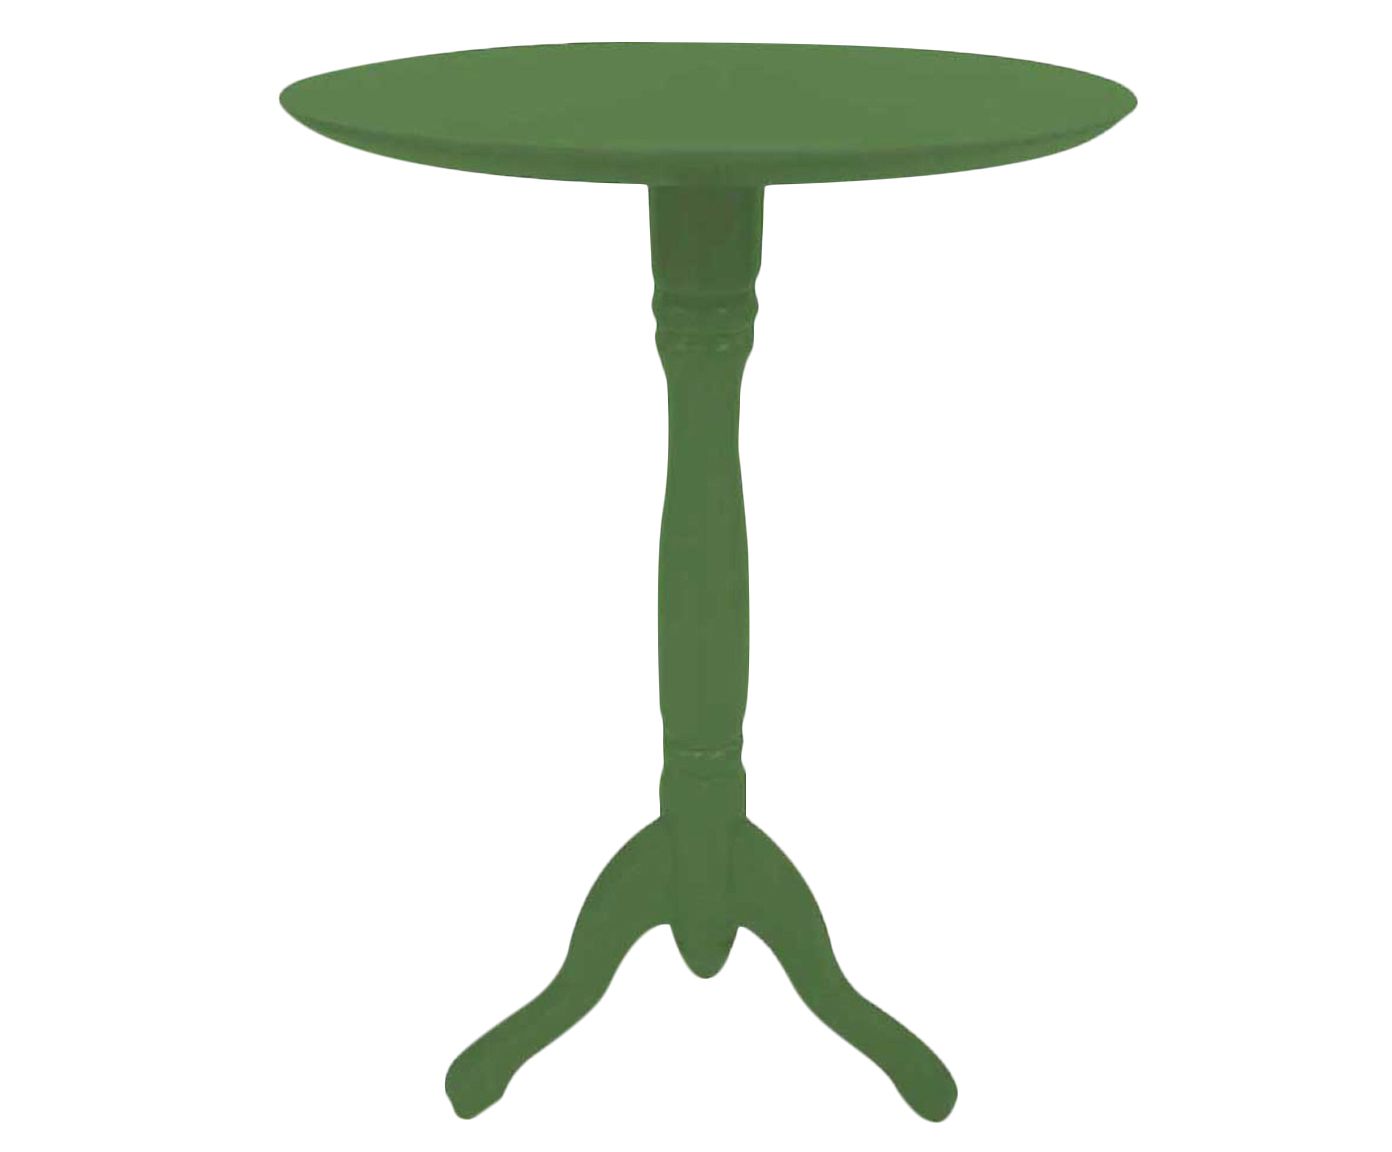 MESA LATERAL JUDITH - VERDE MUSGO | Westwing.com.br